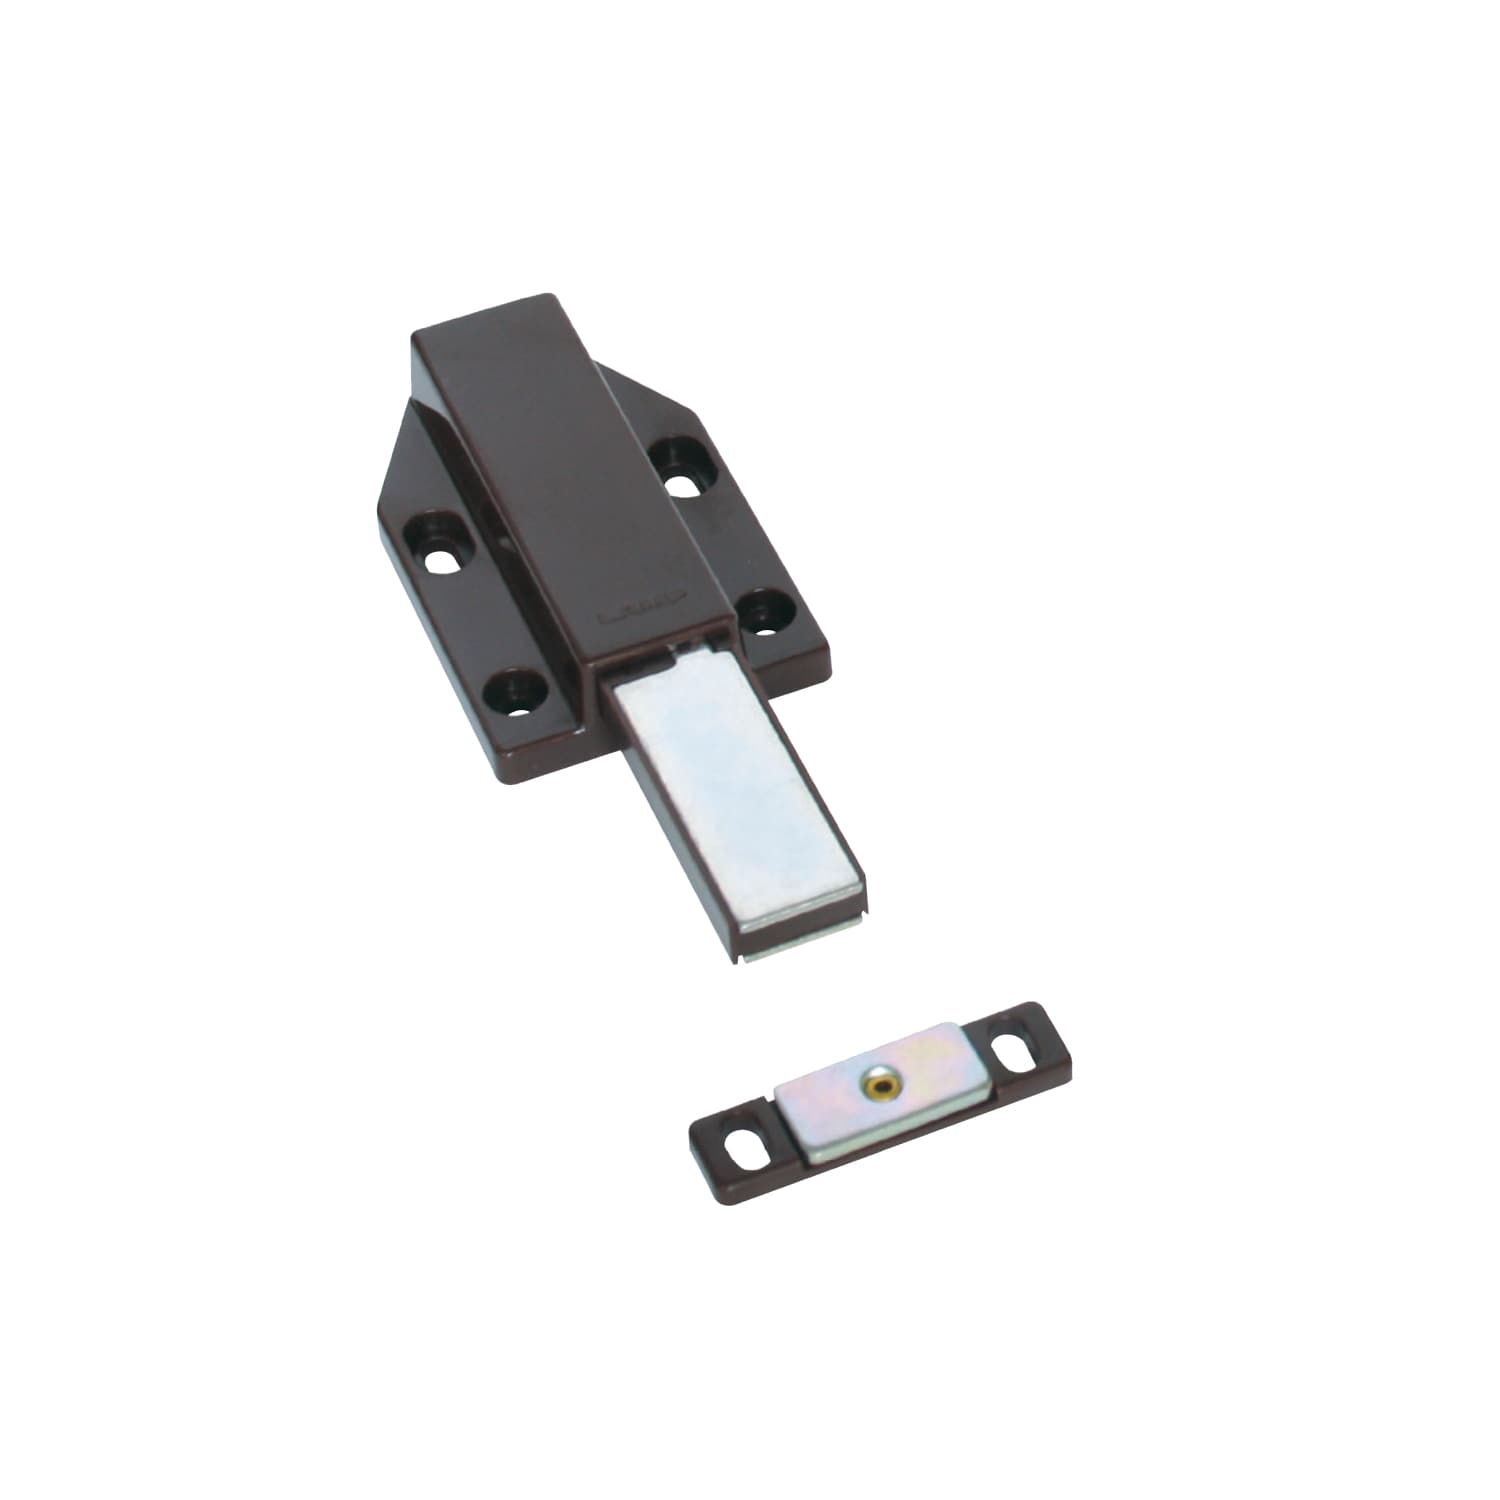 Sugatsune Magnetic Touch Latch for Overlay Doors (Single)